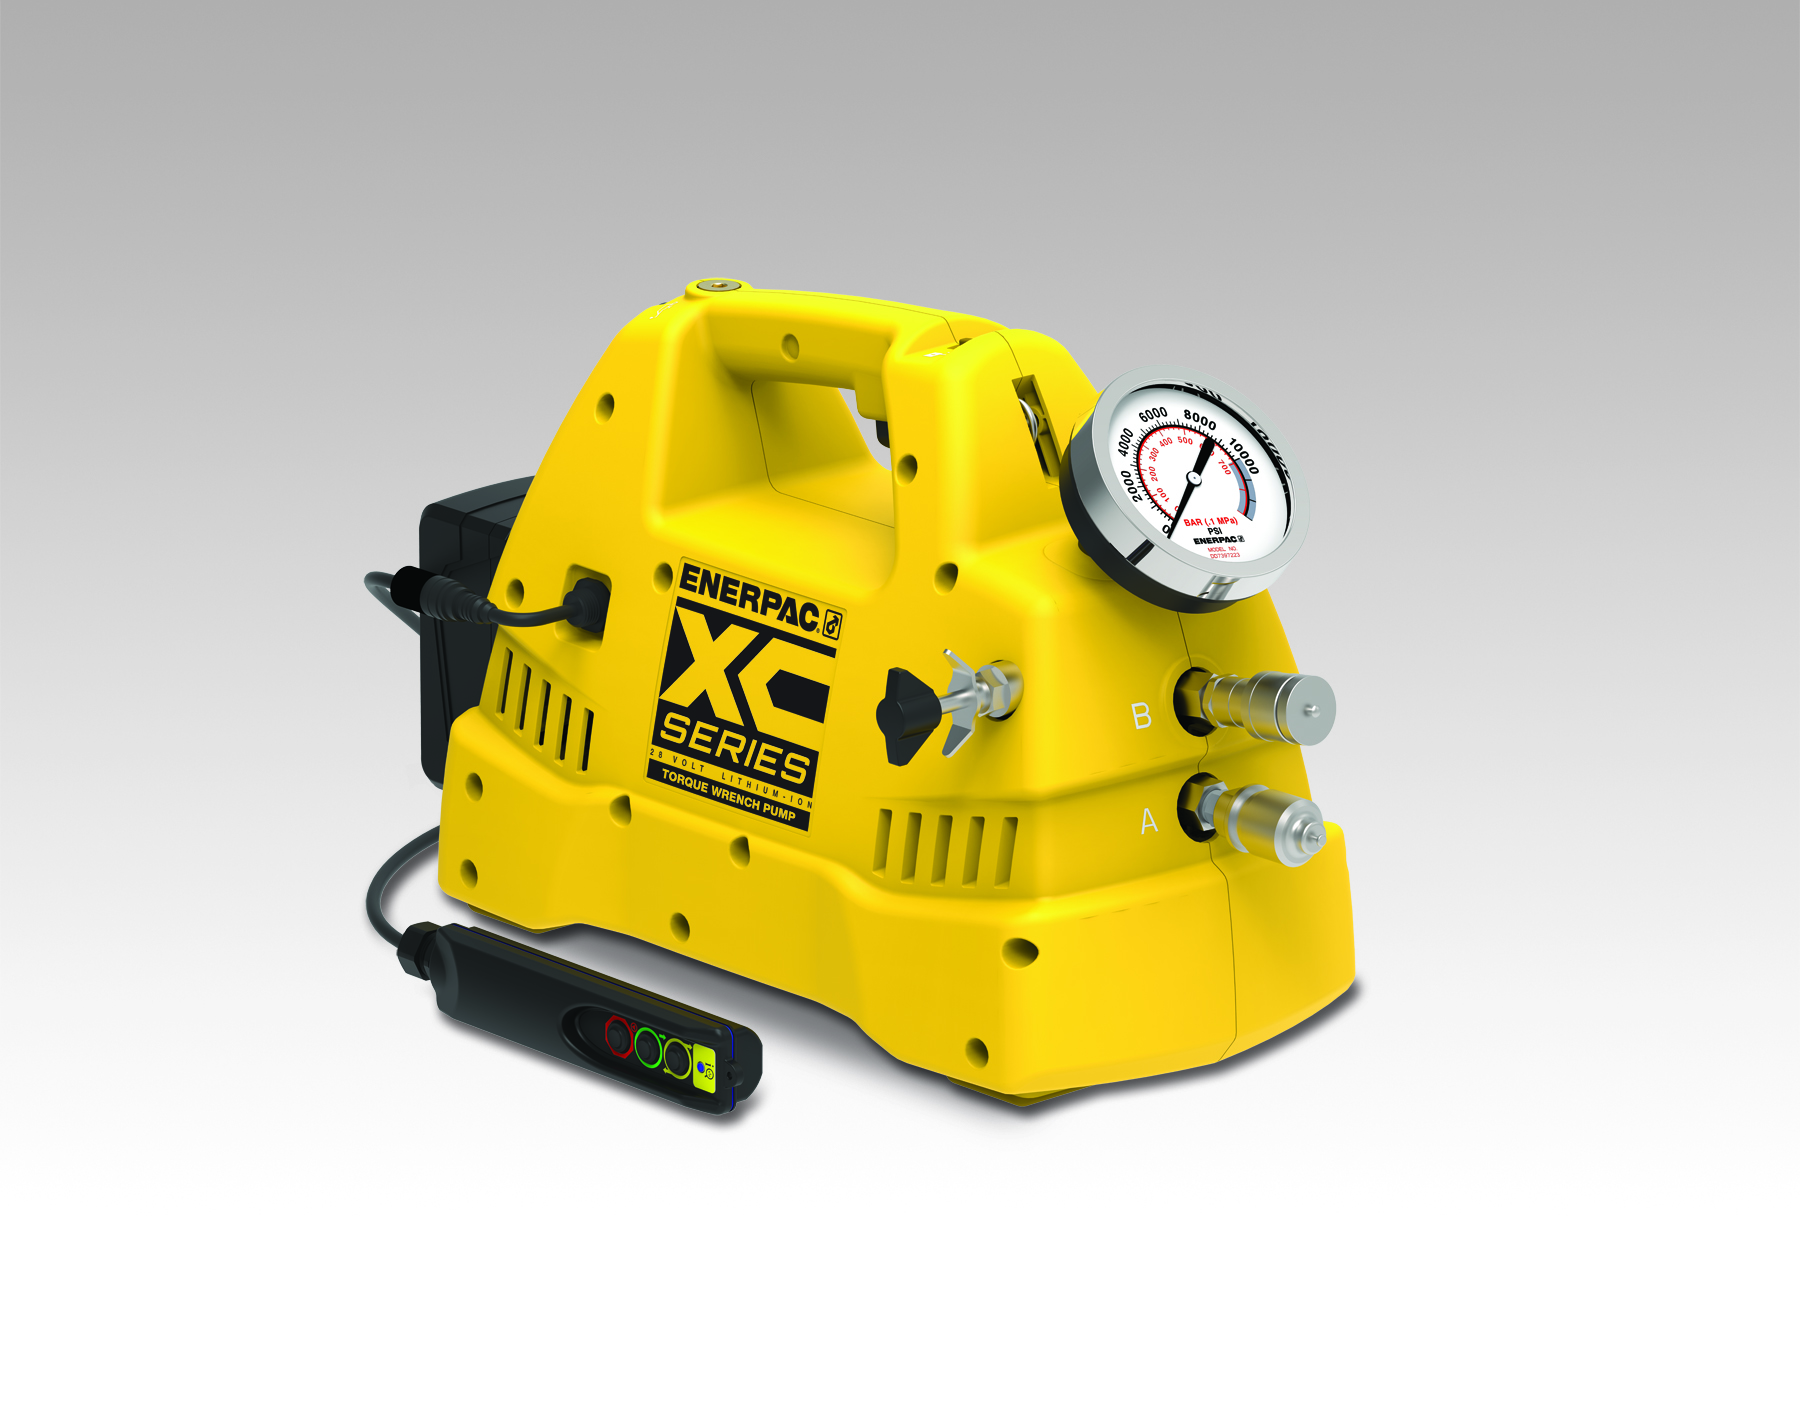 The Enerpac XC-Series battery torque wrench pump with pendant.